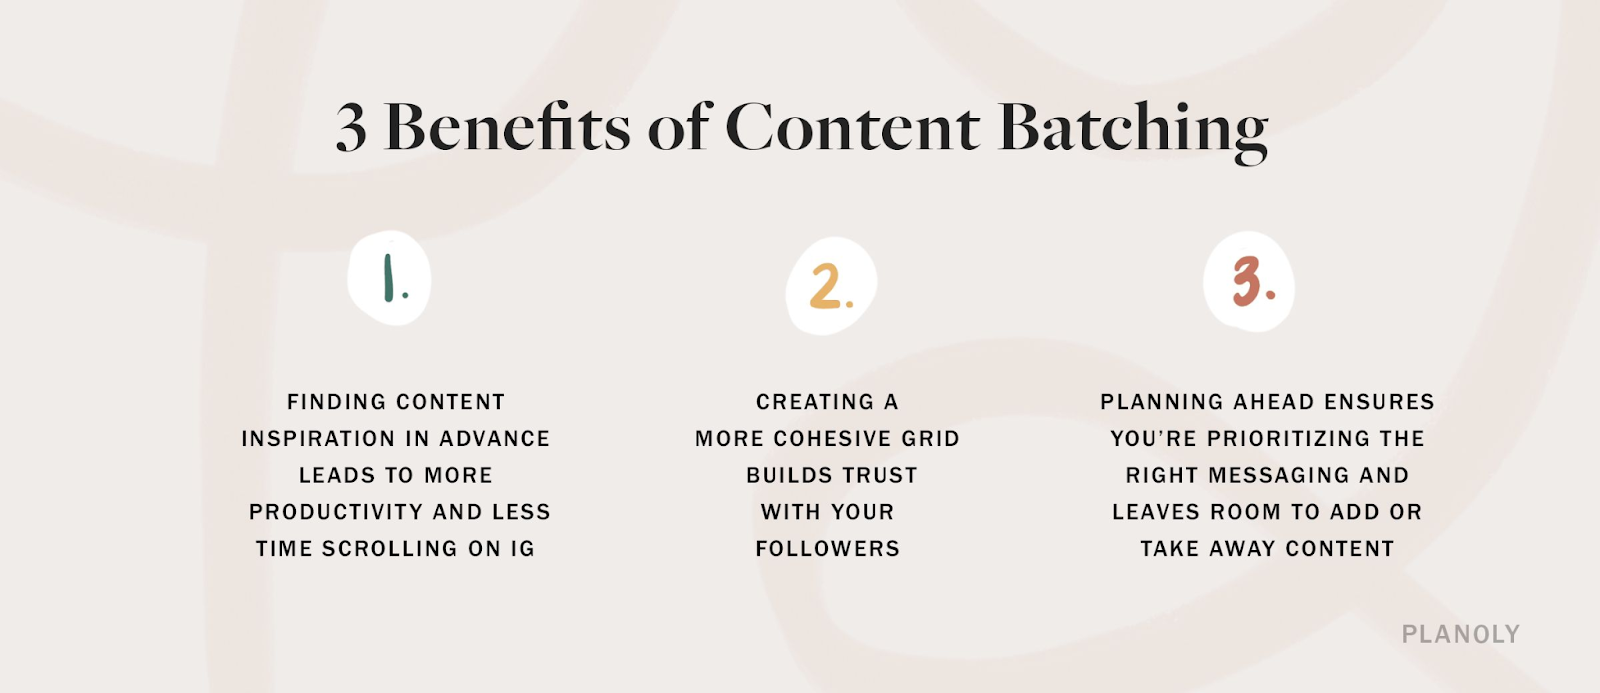 3 Benefits of Content Batching for consistency 